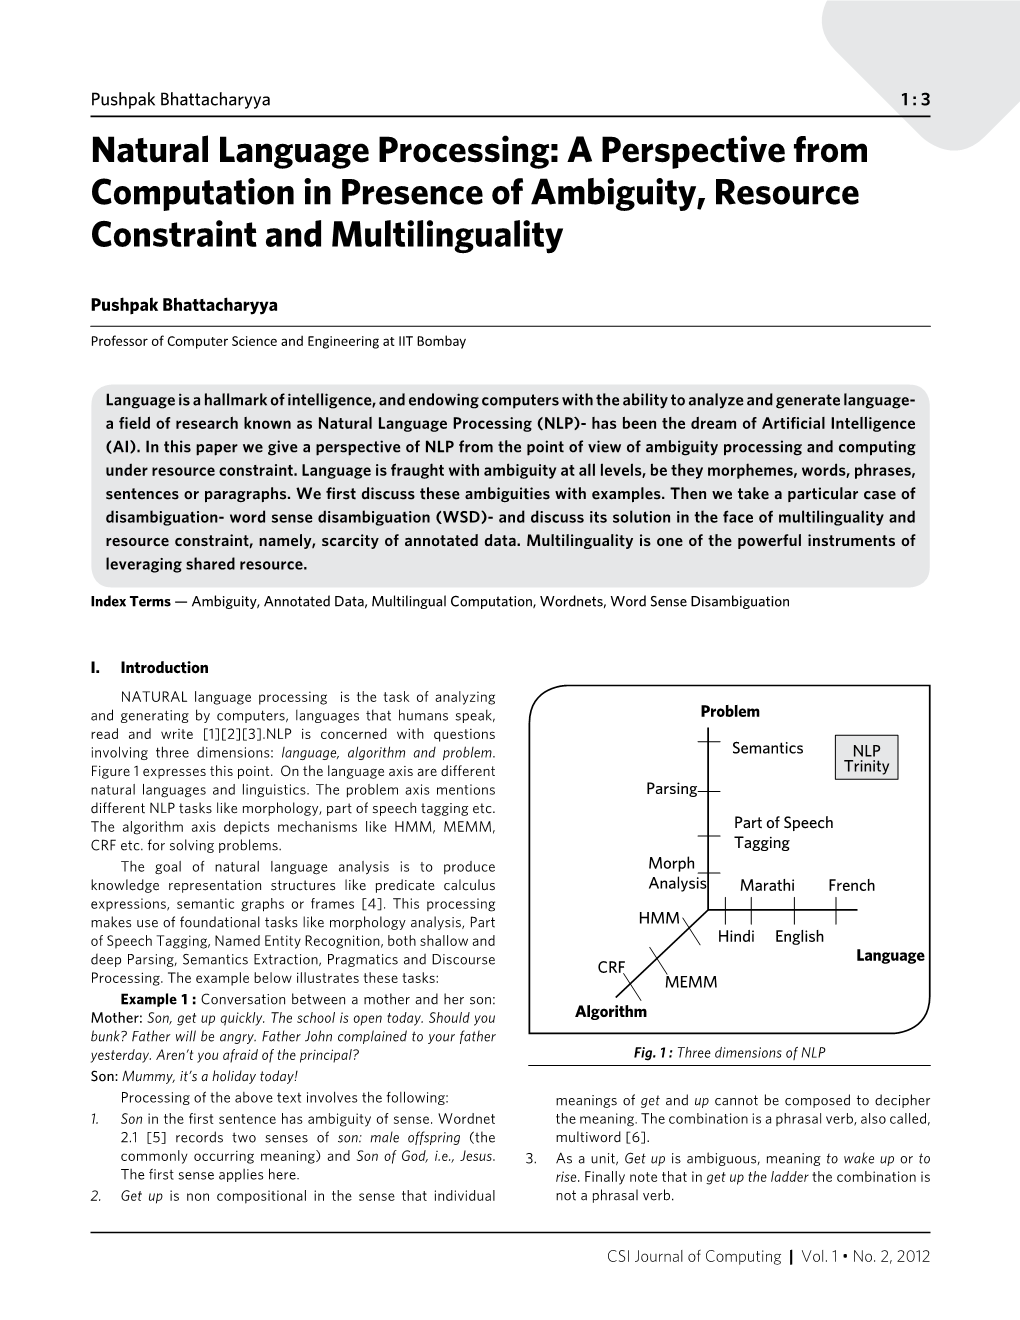 A Perspective from Computation in Presence of Ambiguity, Resource Constraint and Multilinguality